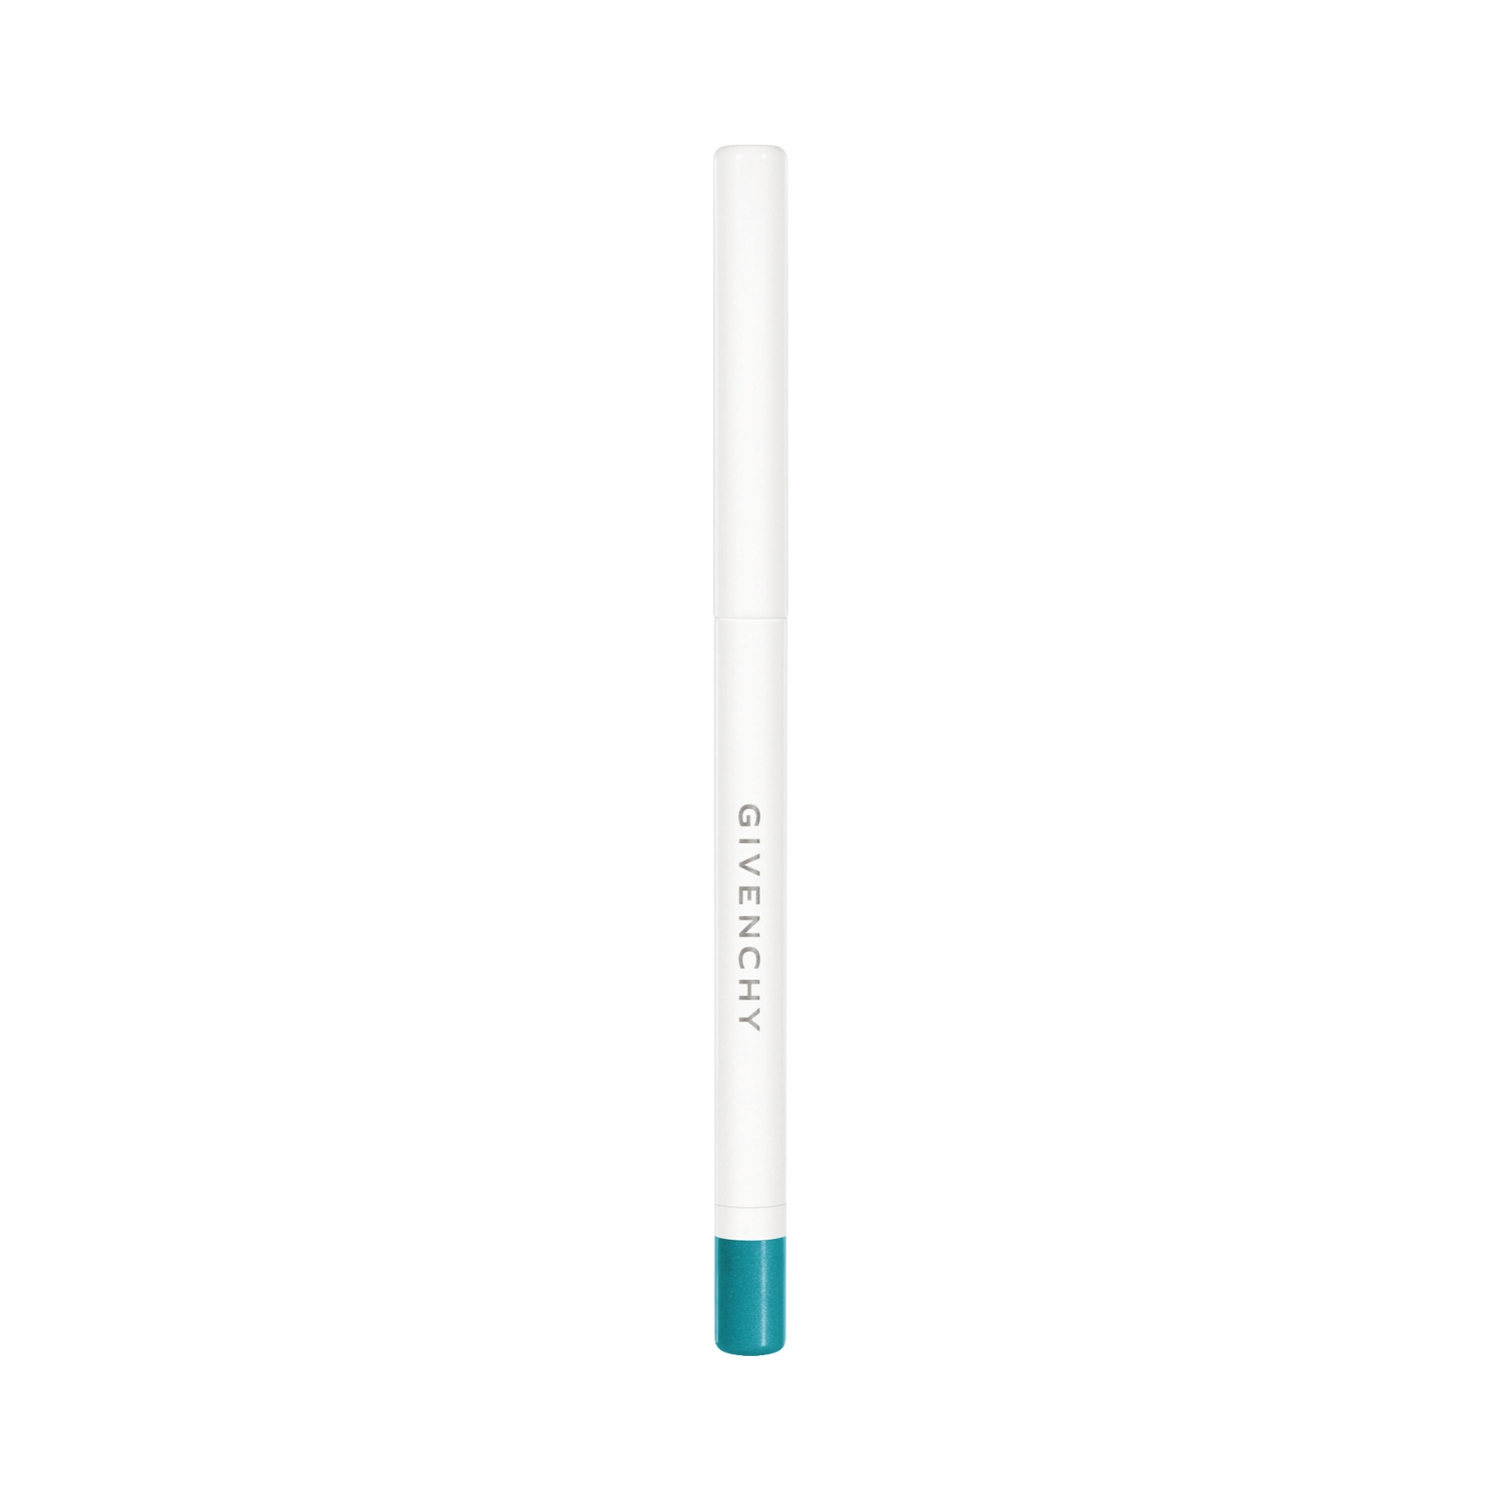 Givenchy | Givenchy Khol Couture Waterproof Eye Pencil Retractable Eyeliner - N 3 Turquoise (0.3g)